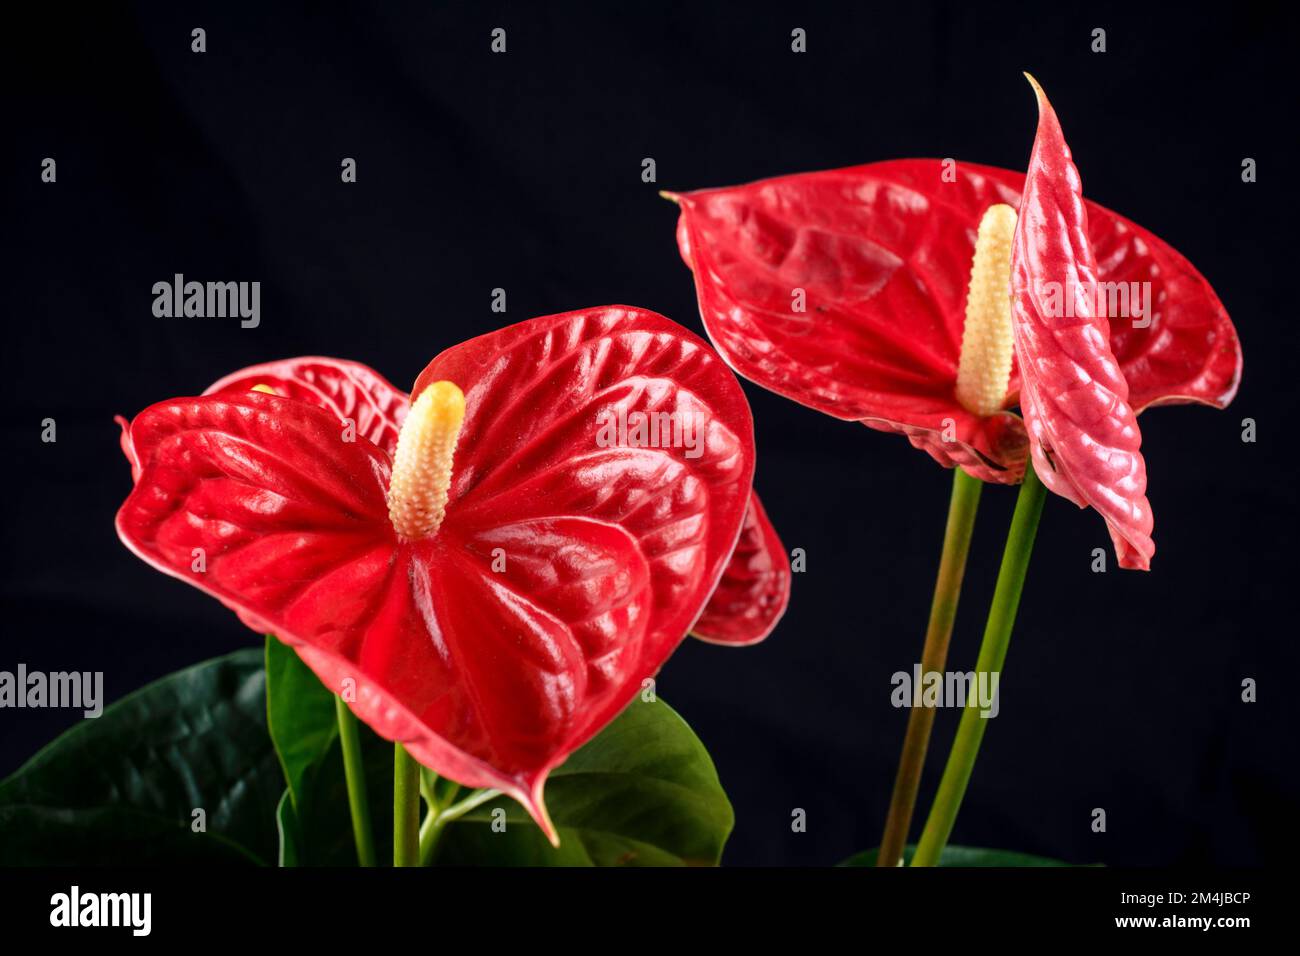 Red Anthurium Flamingo Flower isolated on black background. Anthurium is a genus of about 1000 species of flowering plants, the largest genus of the a Stock Photo